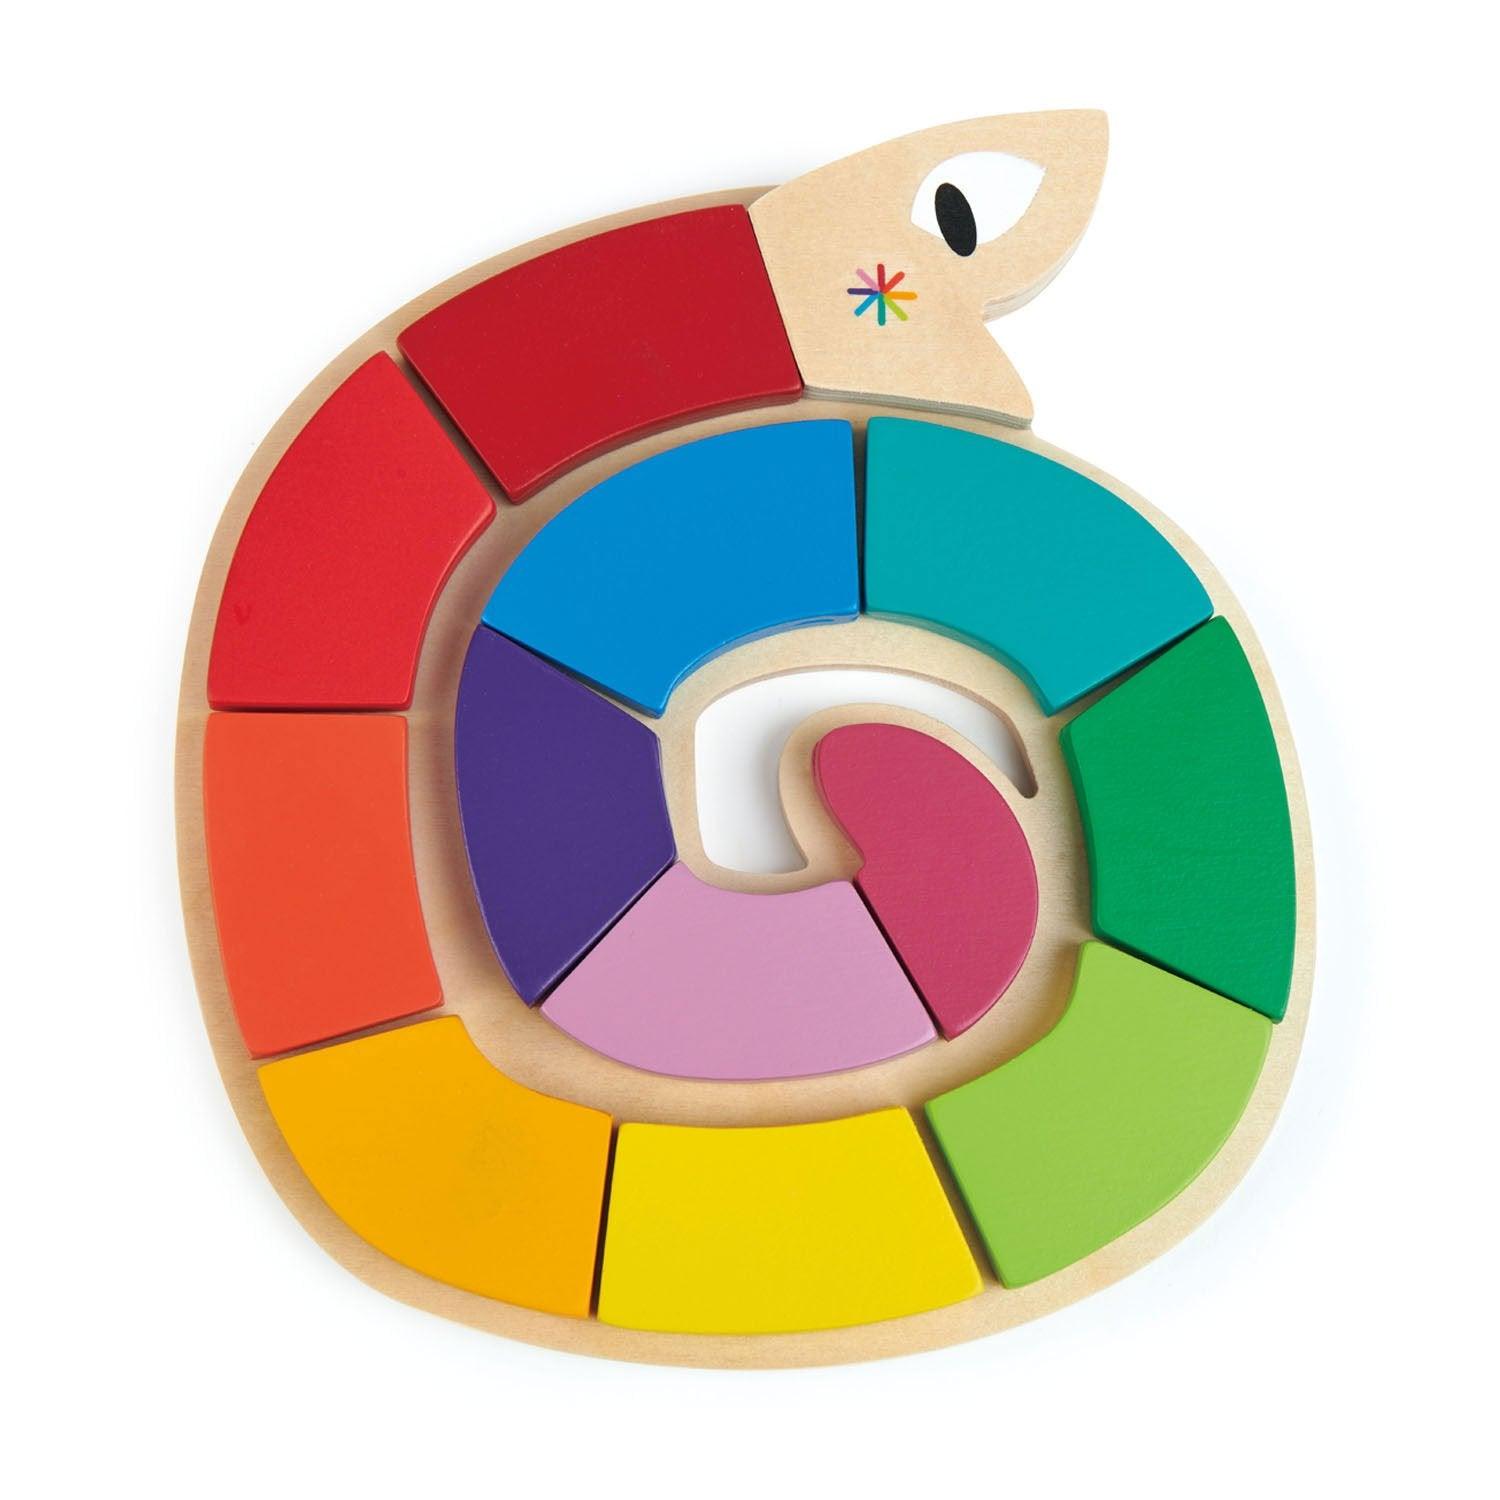 Tender Leaf Toys: Color Me Happy snake colors and shapes puzzle